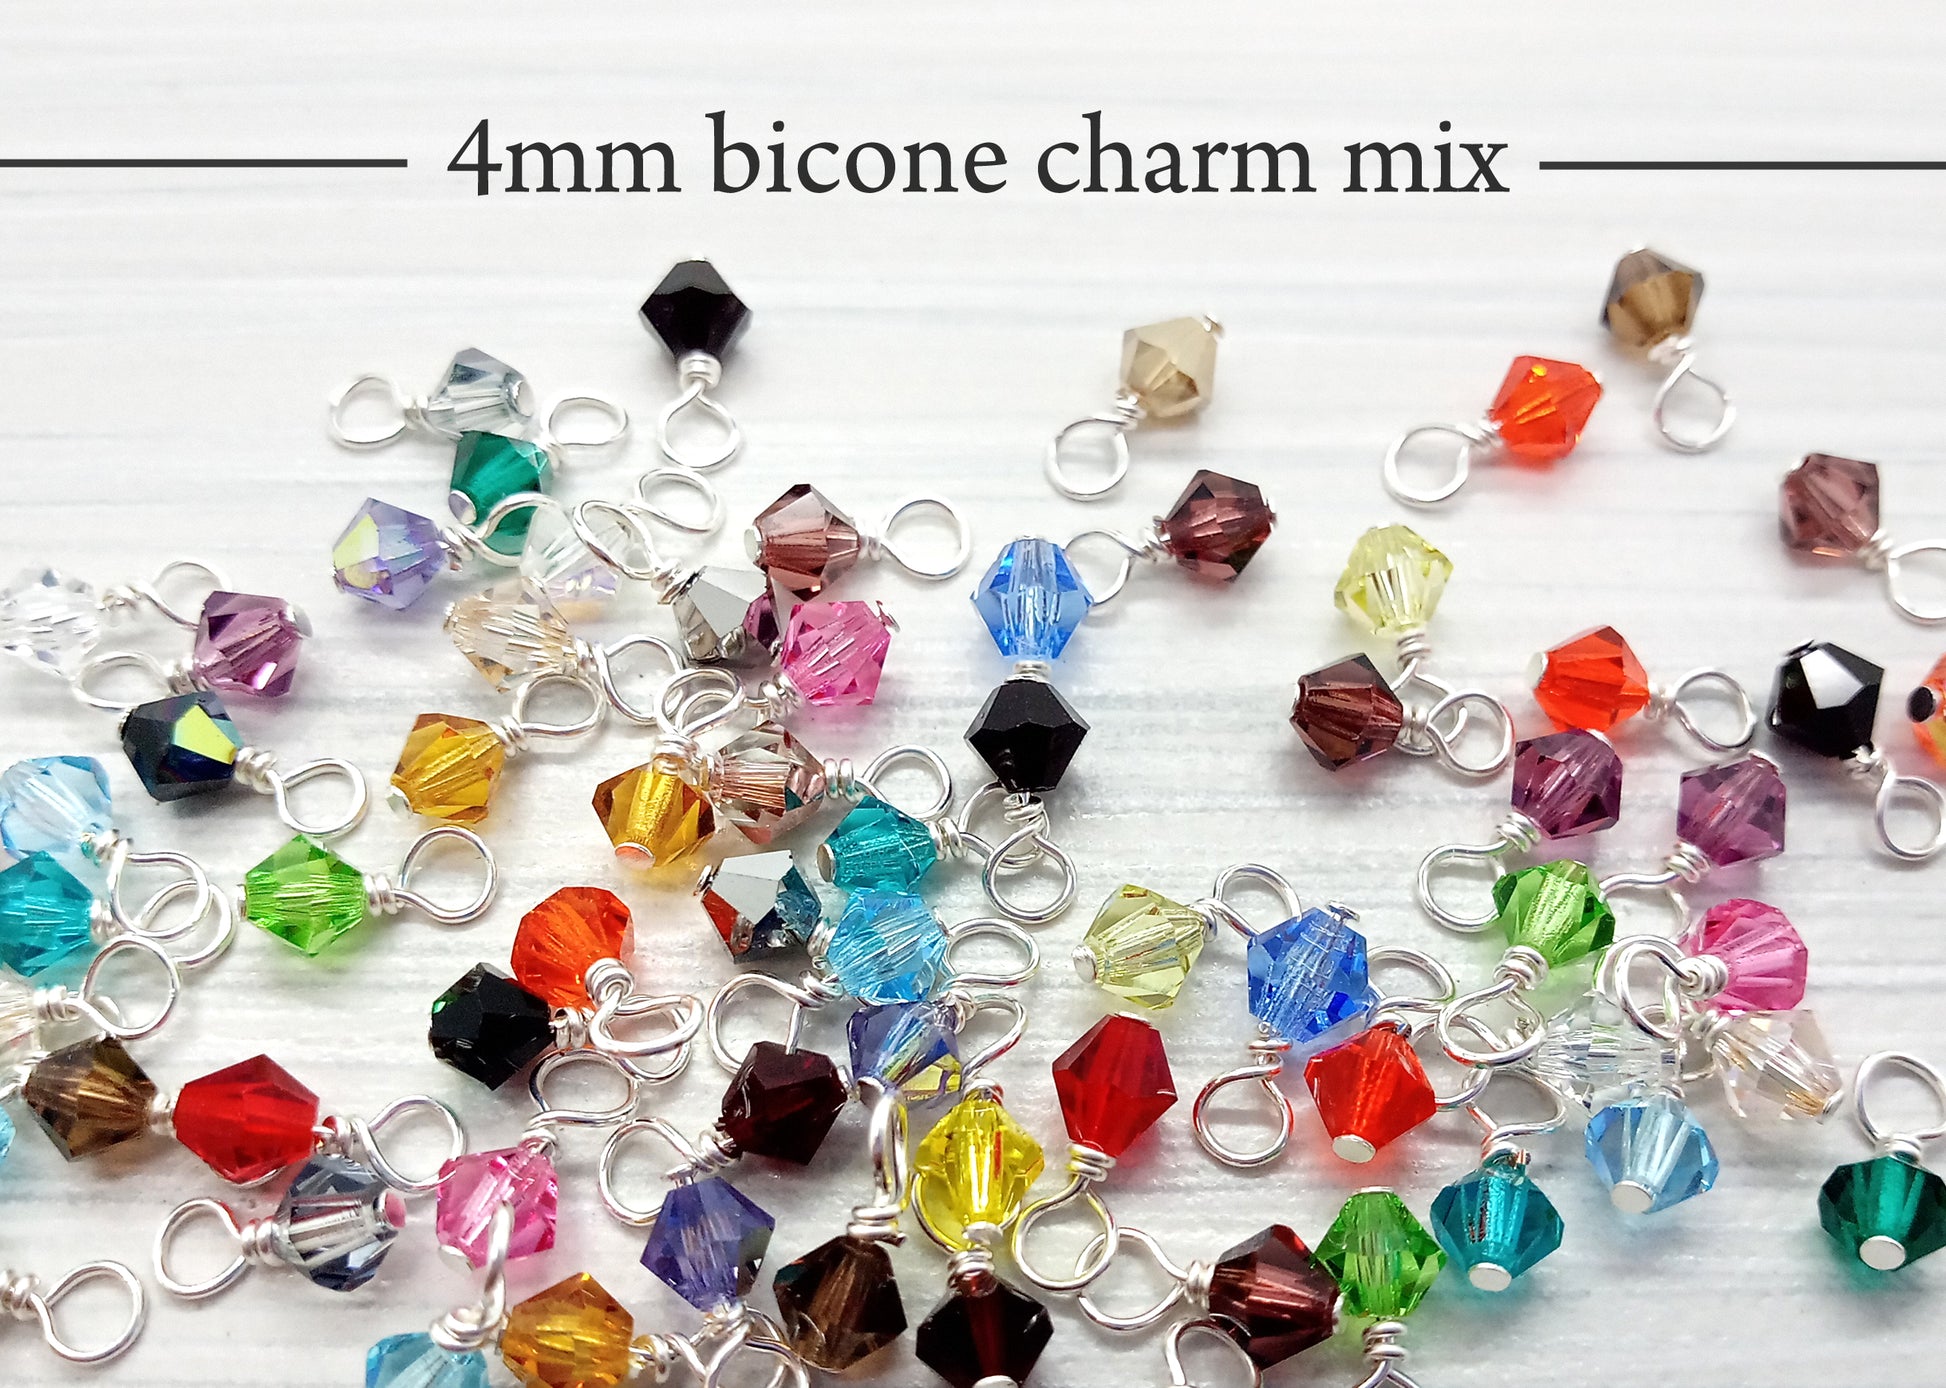 Bulk Crystal Bicone Bead Charms, 500 pc Mixed Colors in 4mm 5mm and 6mm - Adorabilities Charms & Trinkets